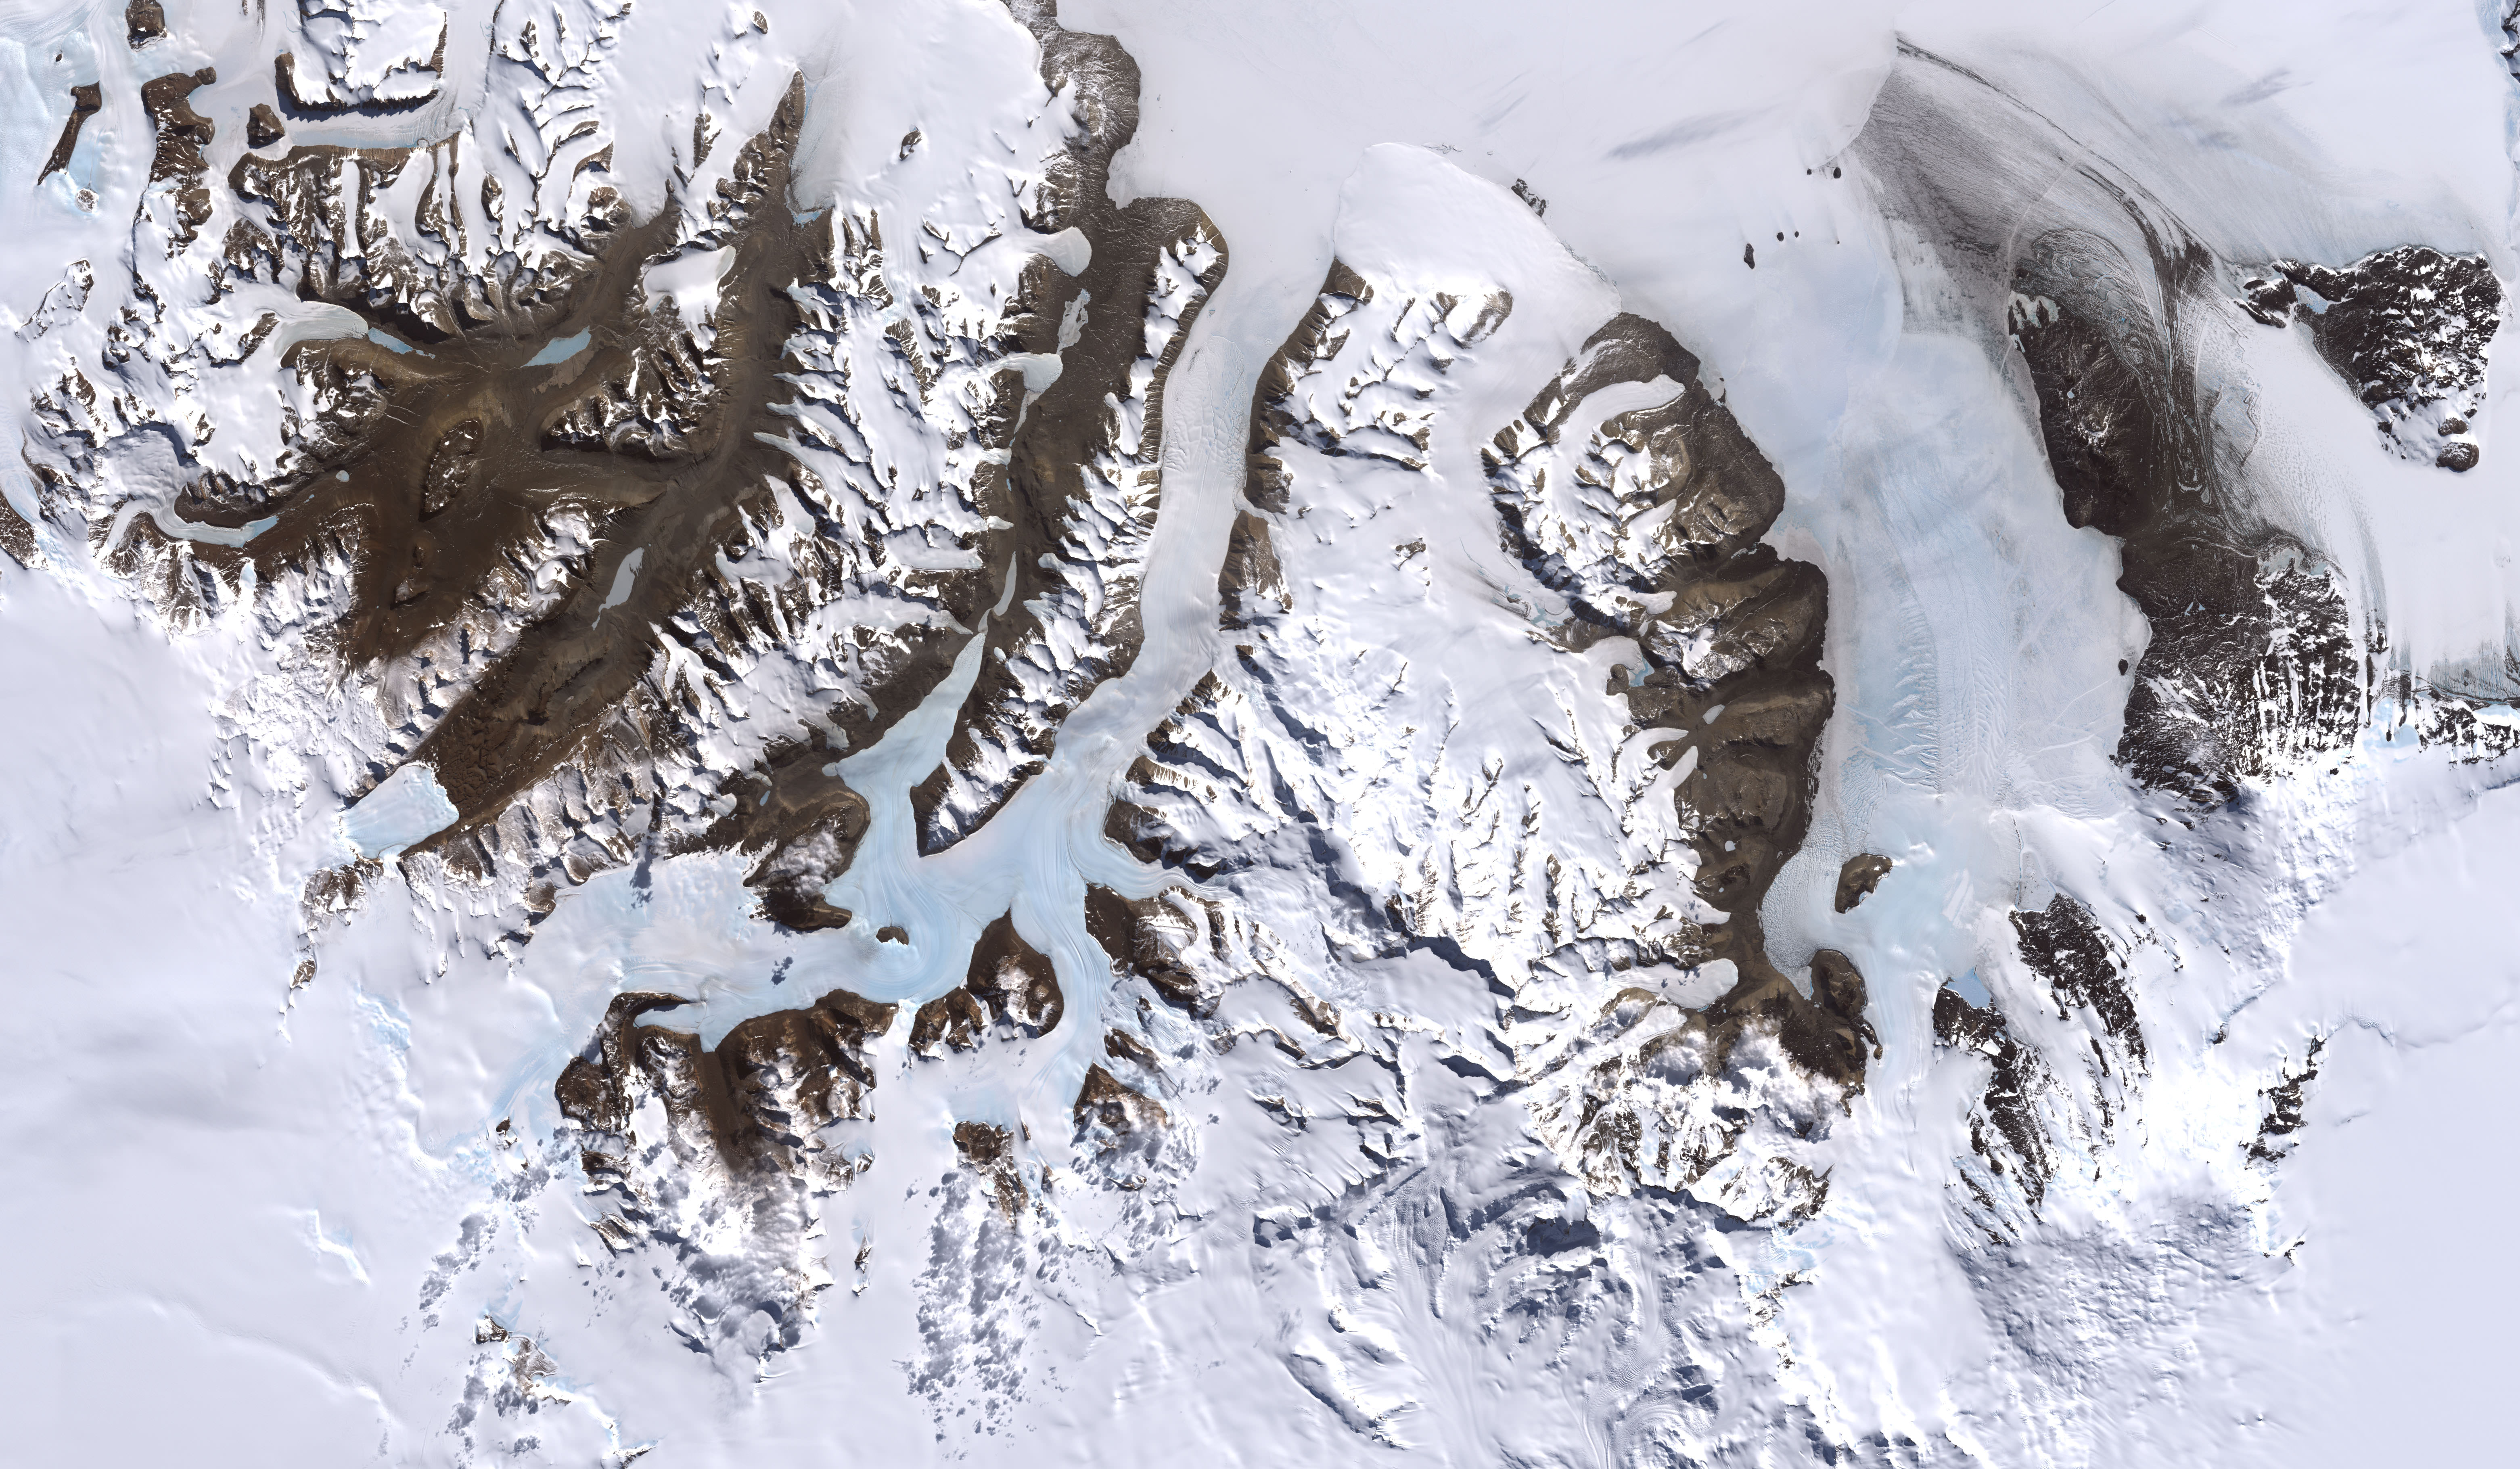 Image of the McMurdo Dry Valleys, Antarctica,  acquired by Landsat 7’s Enhanced Thematic Mapper plus (ETM+) instrument. Credit: NASA/EO